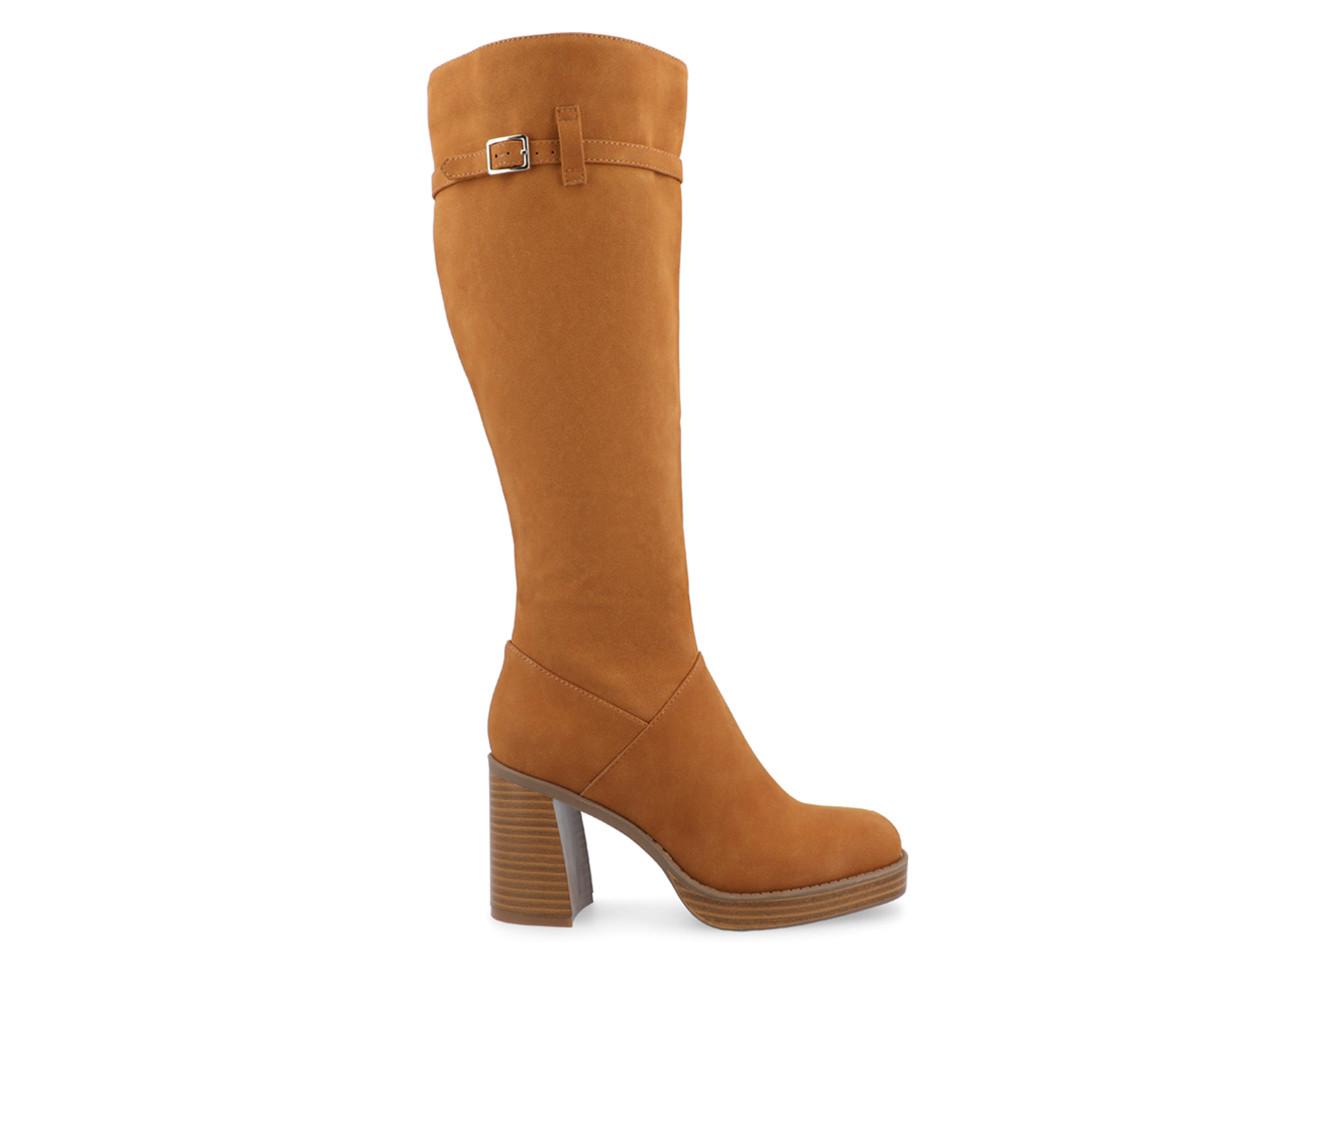 Women's Journee Collection Letice Knee High Boots